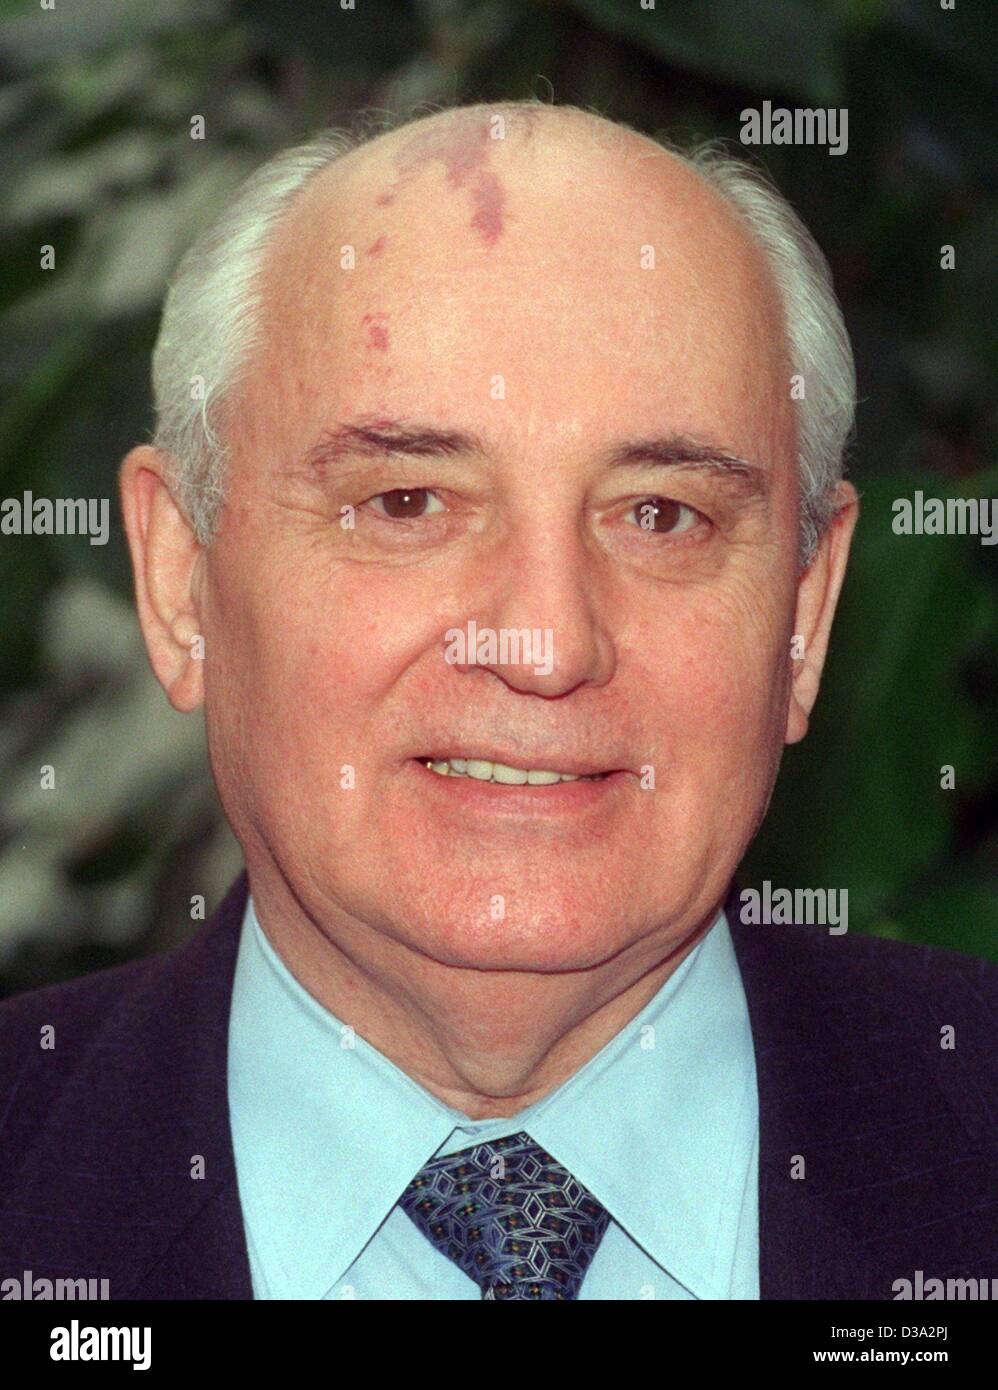 (dpa files) - Former Soviet President Mikhail Gorbachev, pictured in Duesseldorf, Germany, 18 September 1996. He was head of the Soviet state from 1985 until 1991. By initiating a period of political openness (glasnost) and transformation (perestroika) intended to modernize the U.S.S.R. he laid the  Stock Photo